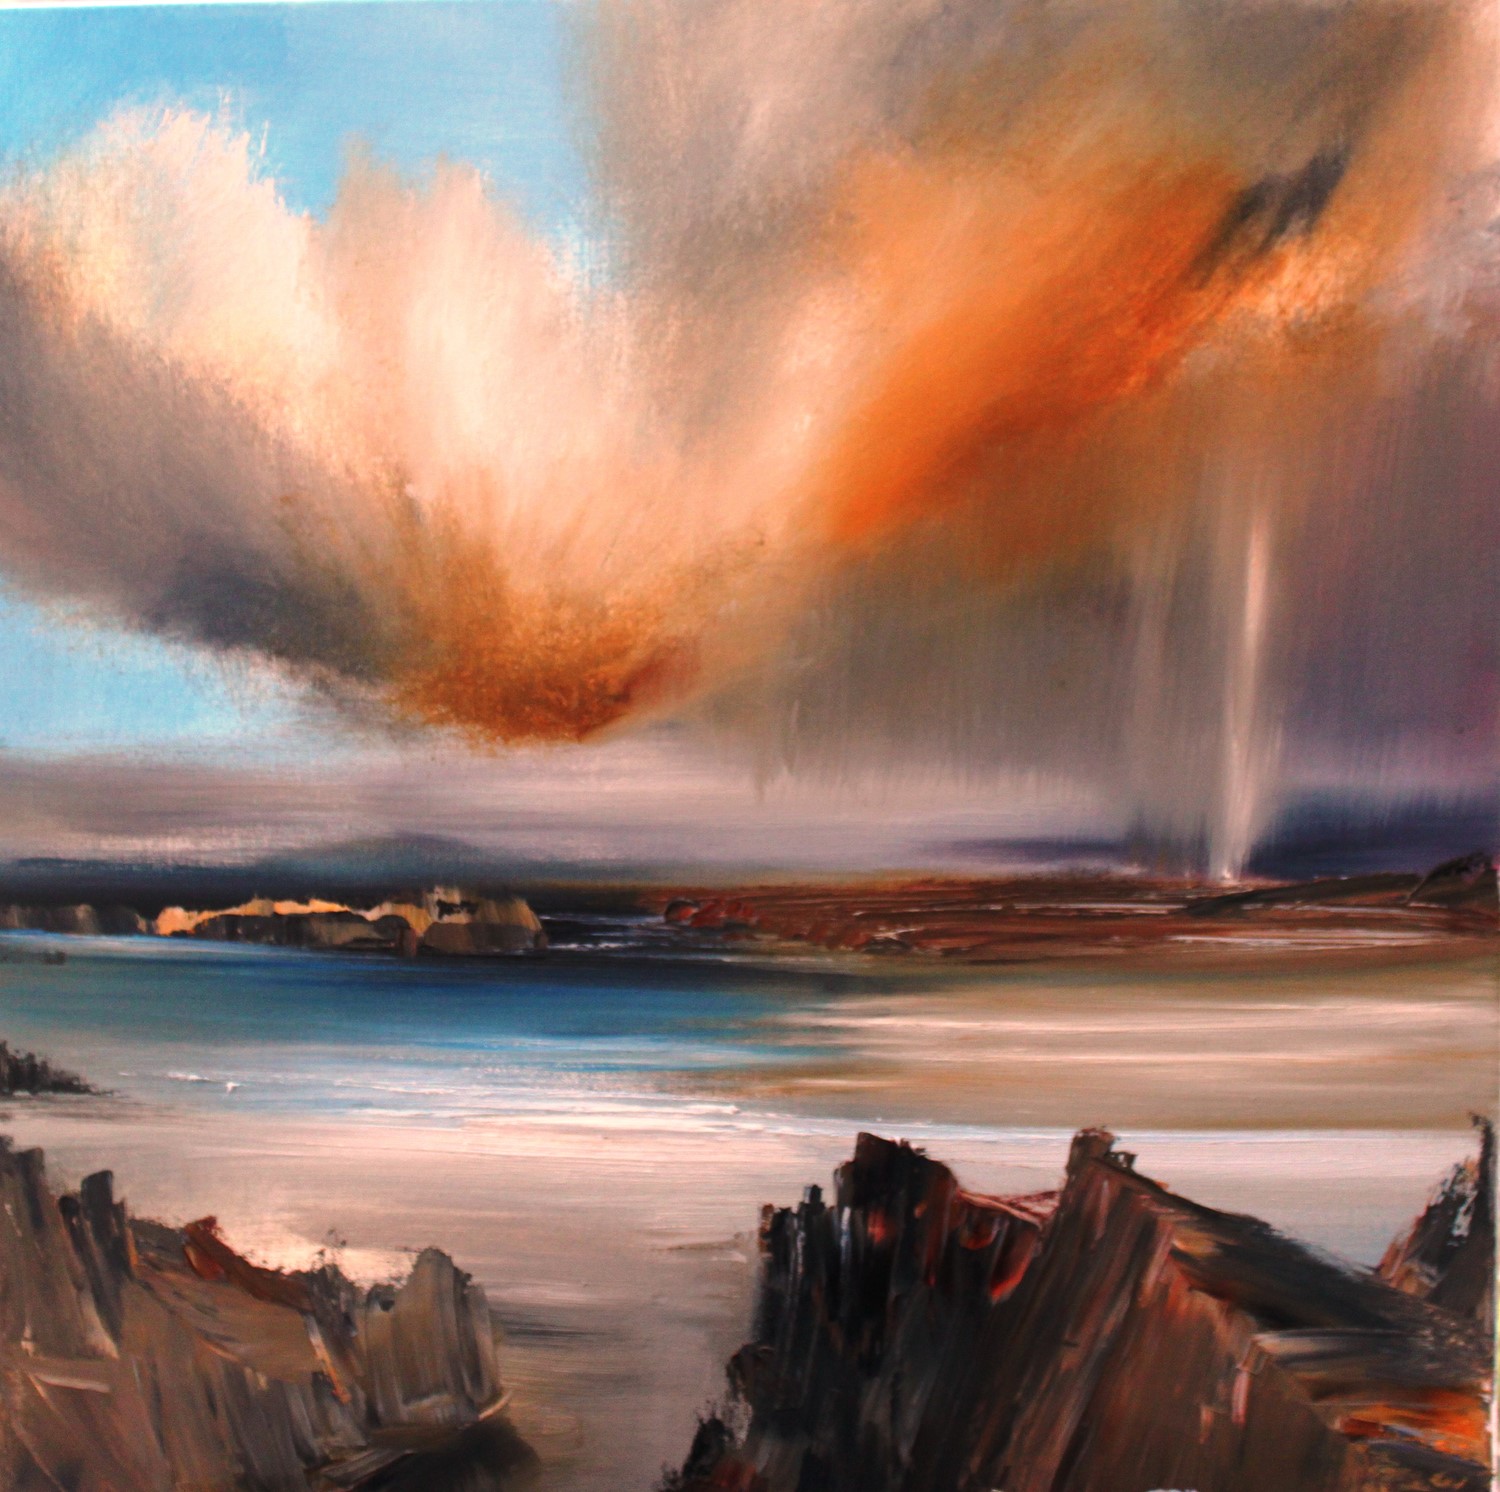 'The Sky is Clearing' by artist Rosanne Barr